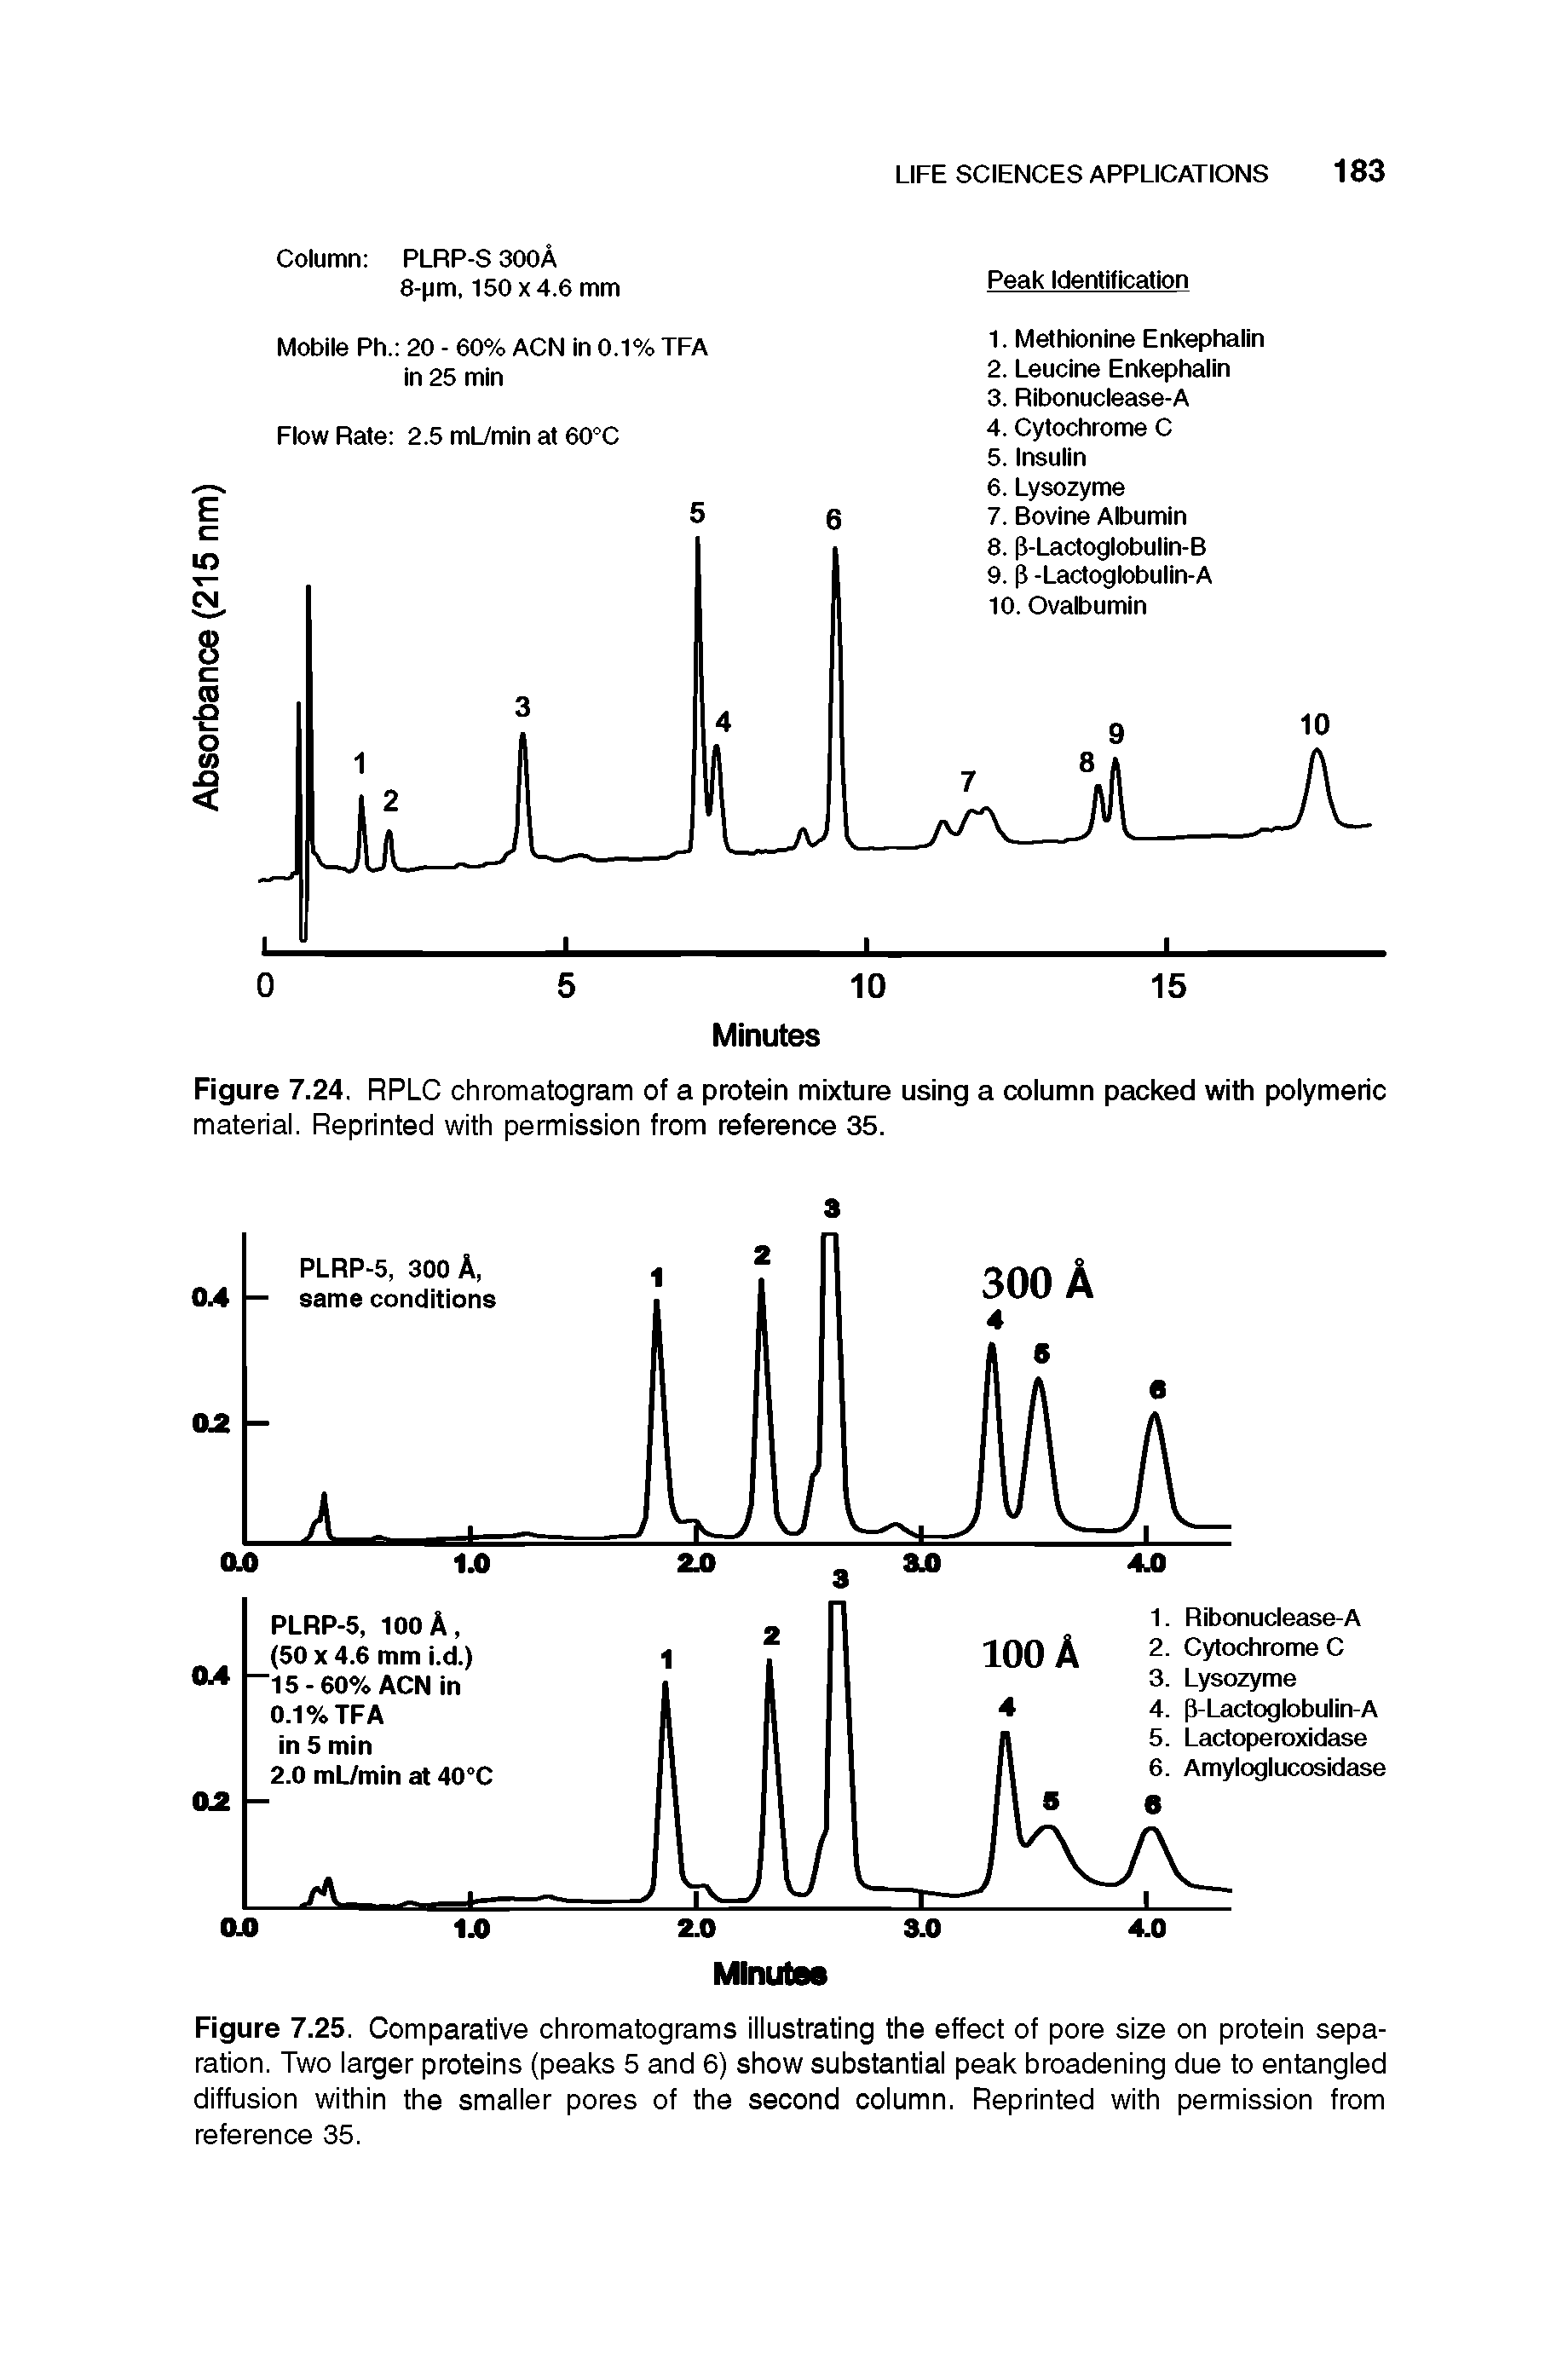 Figure 7.25. Comparative chromatograms illustrating the effect of pore size on protein separation. Two larger proteins (peaks 5 and 6) show substantial peak broadening due to entangled diffusion within the smaller pores of the second column. Reprinted with permission from reference 35.